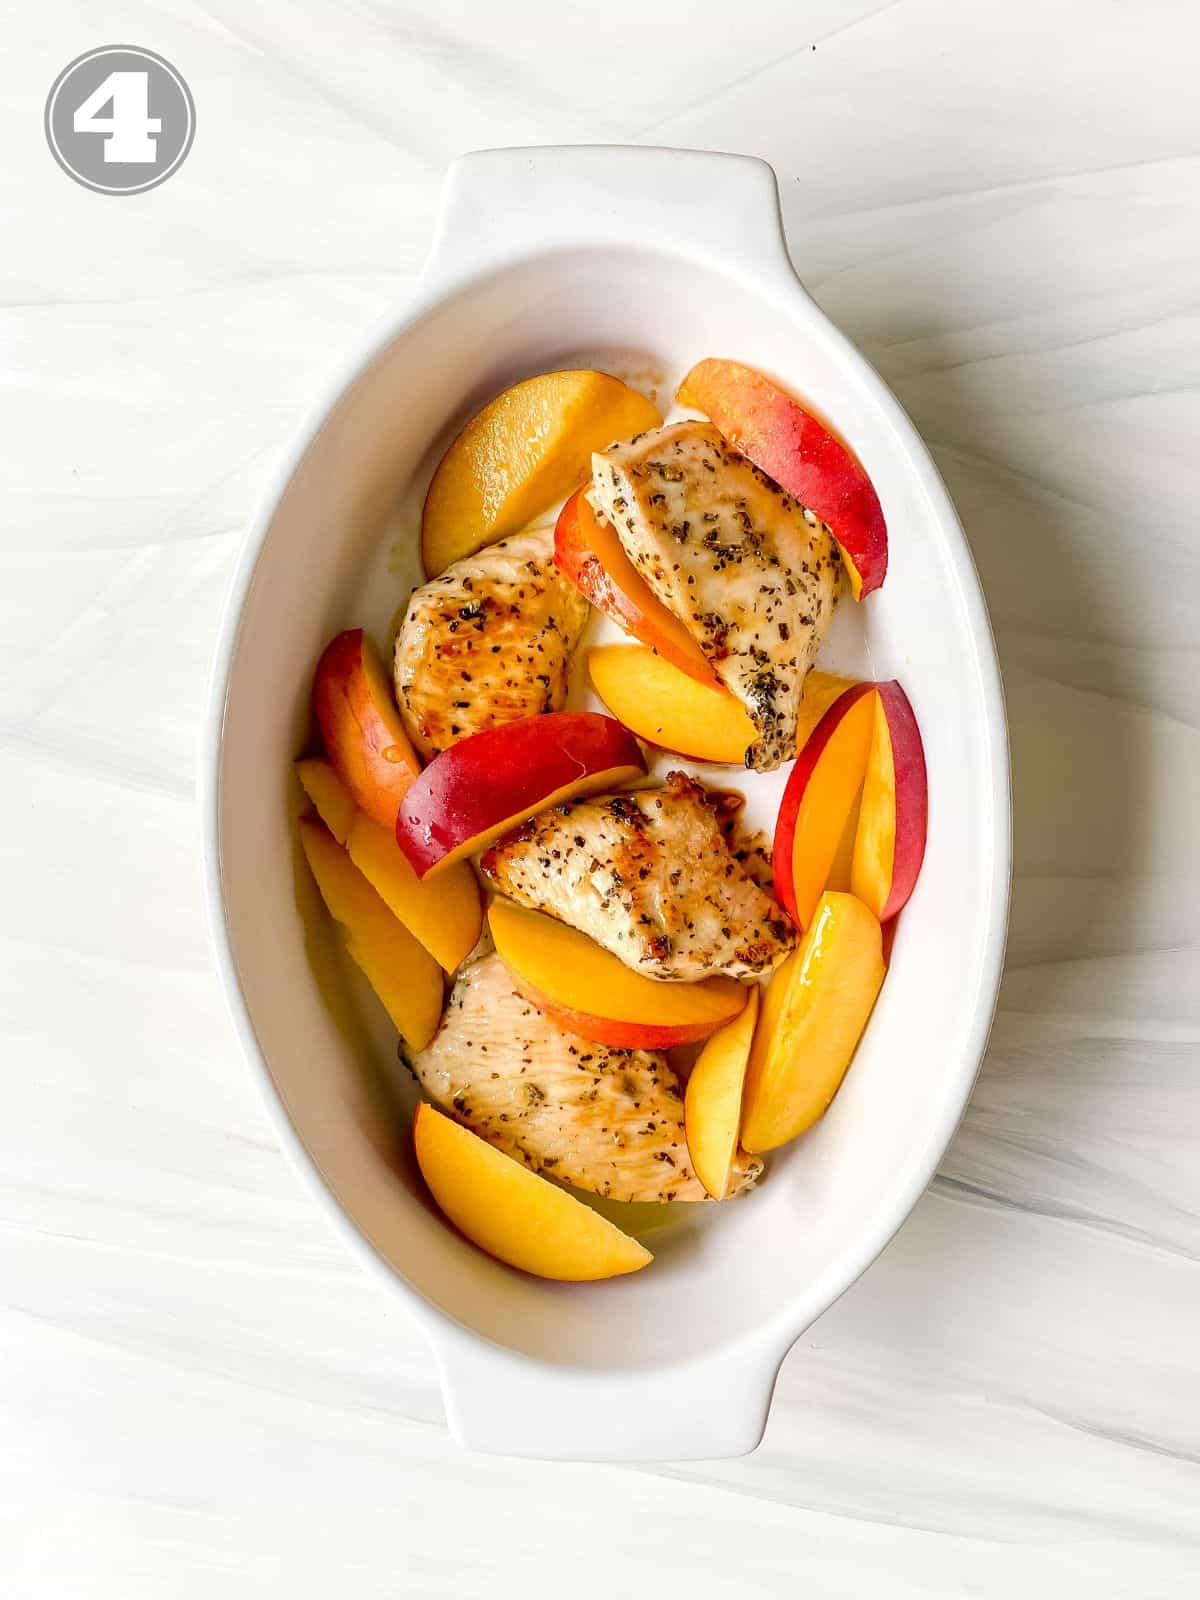 chicken and nectarines in a white ovenproof dish.